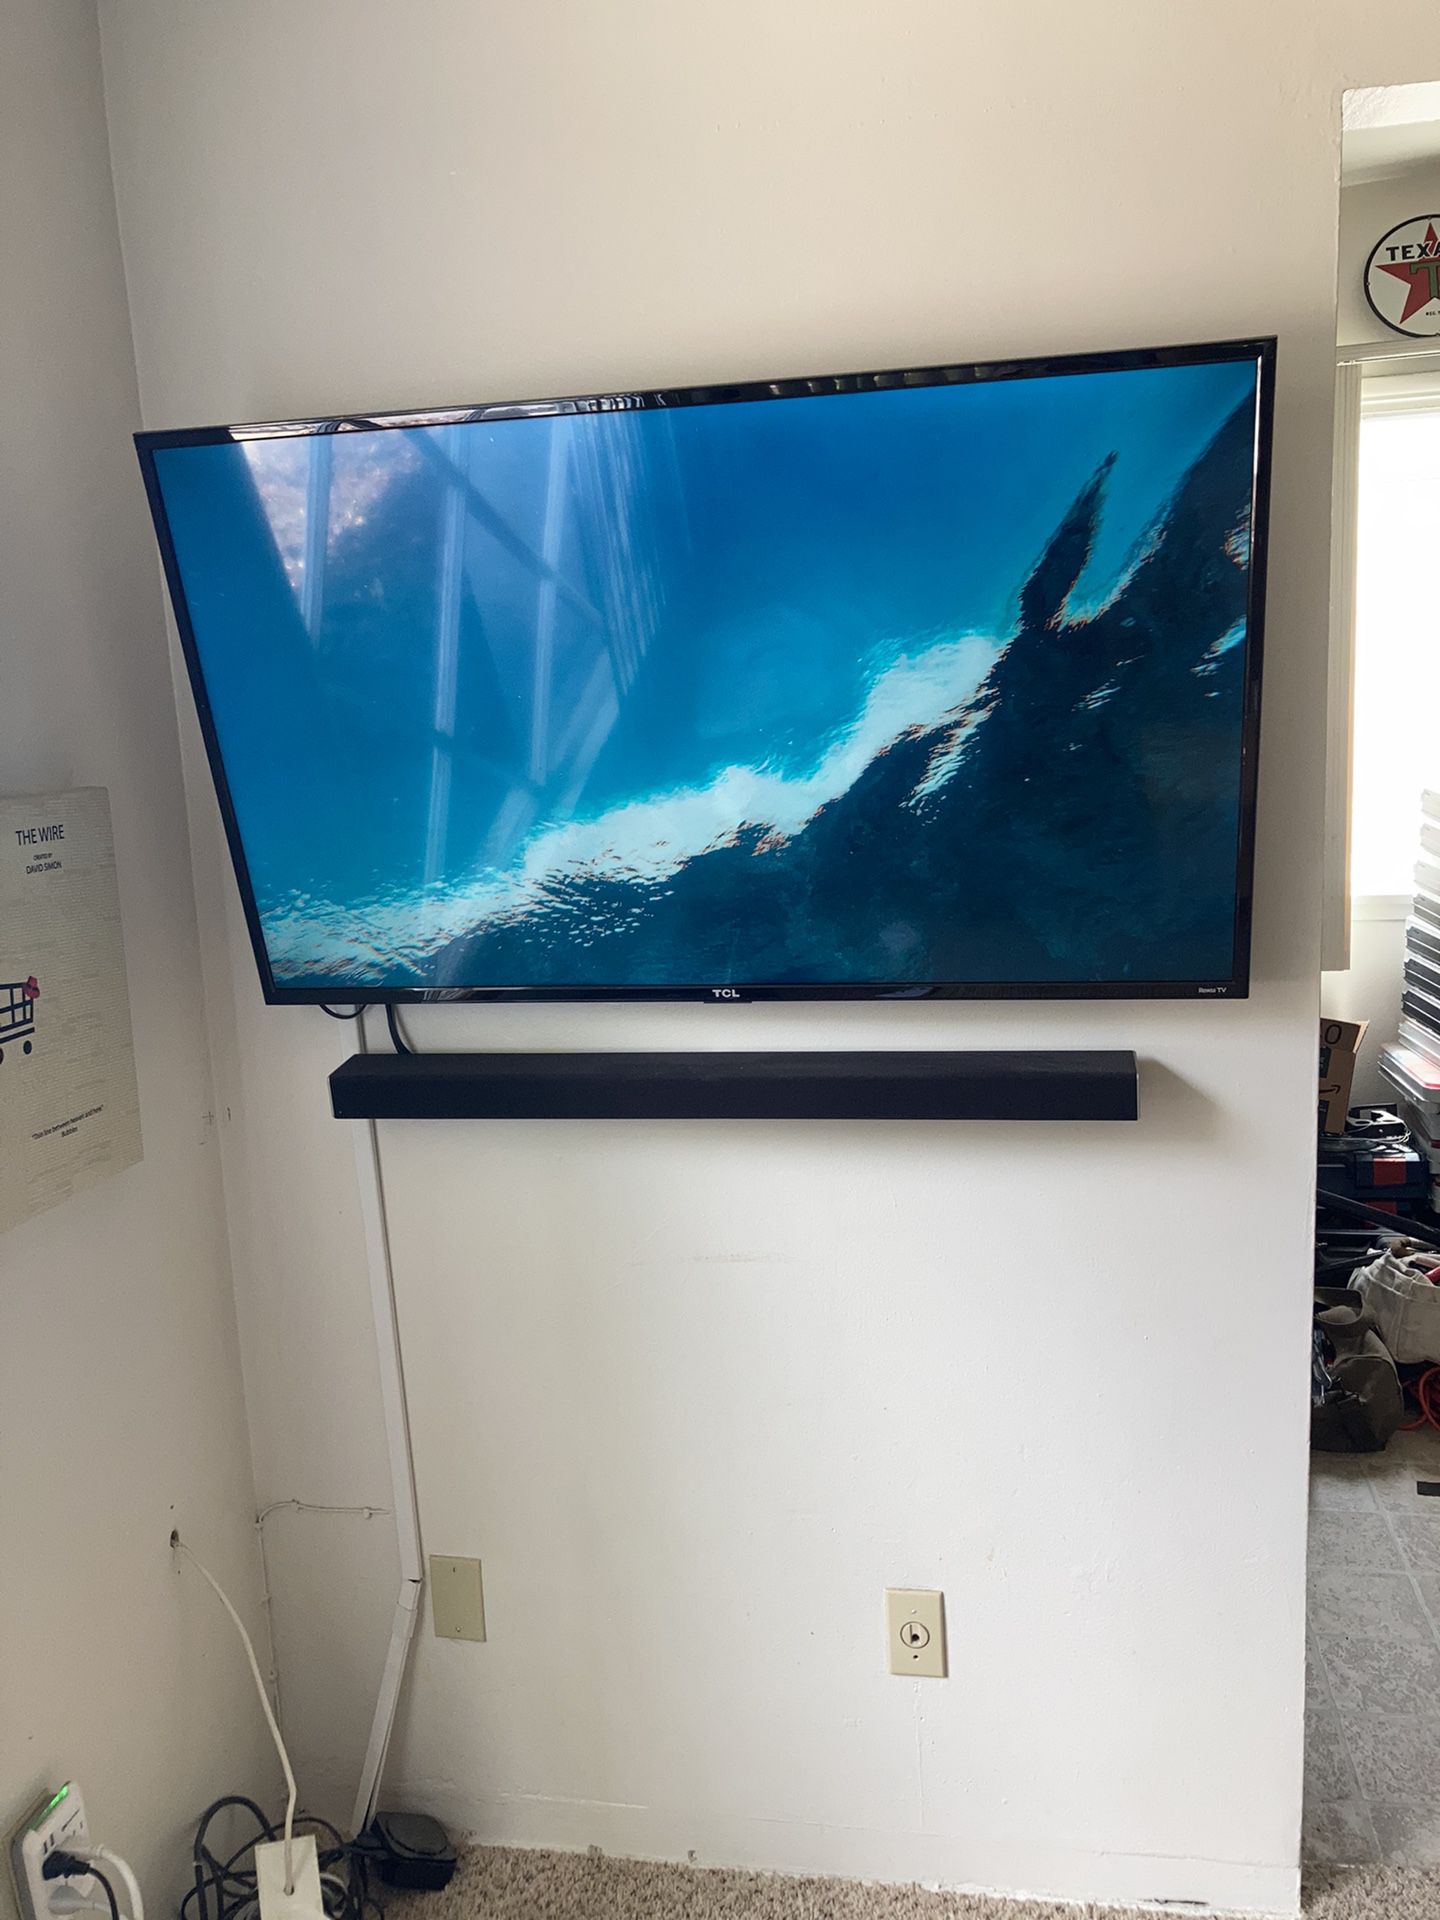 49” TCL 4K TV with Vizio 3.1 Surround sound bar and subwoofer